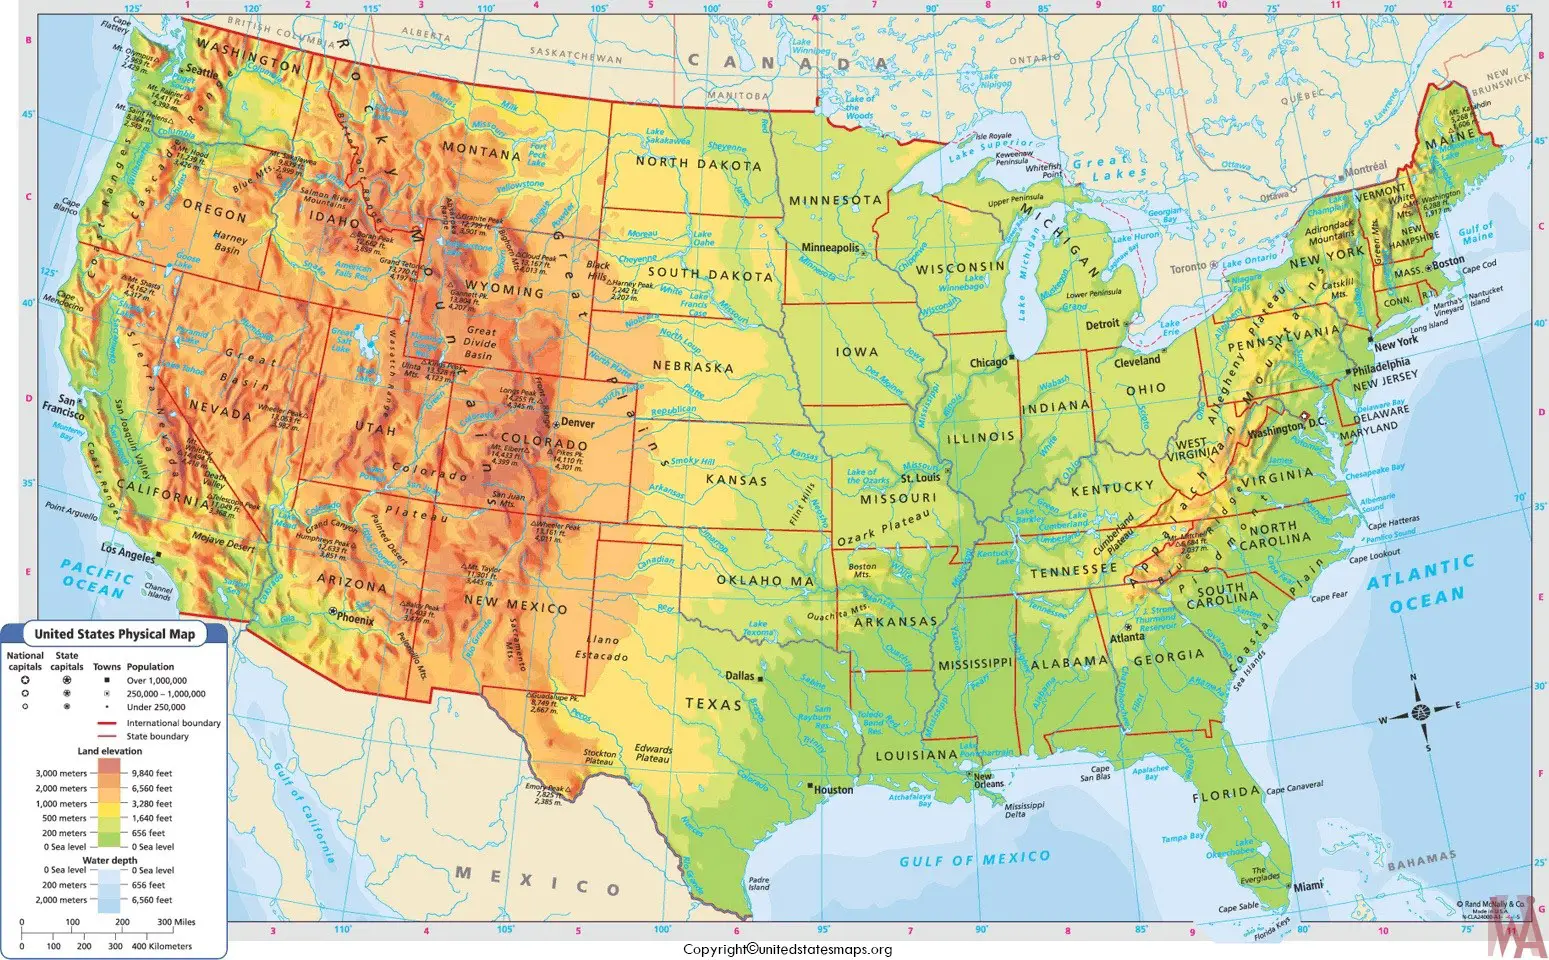 Geographical map of USA Labeled